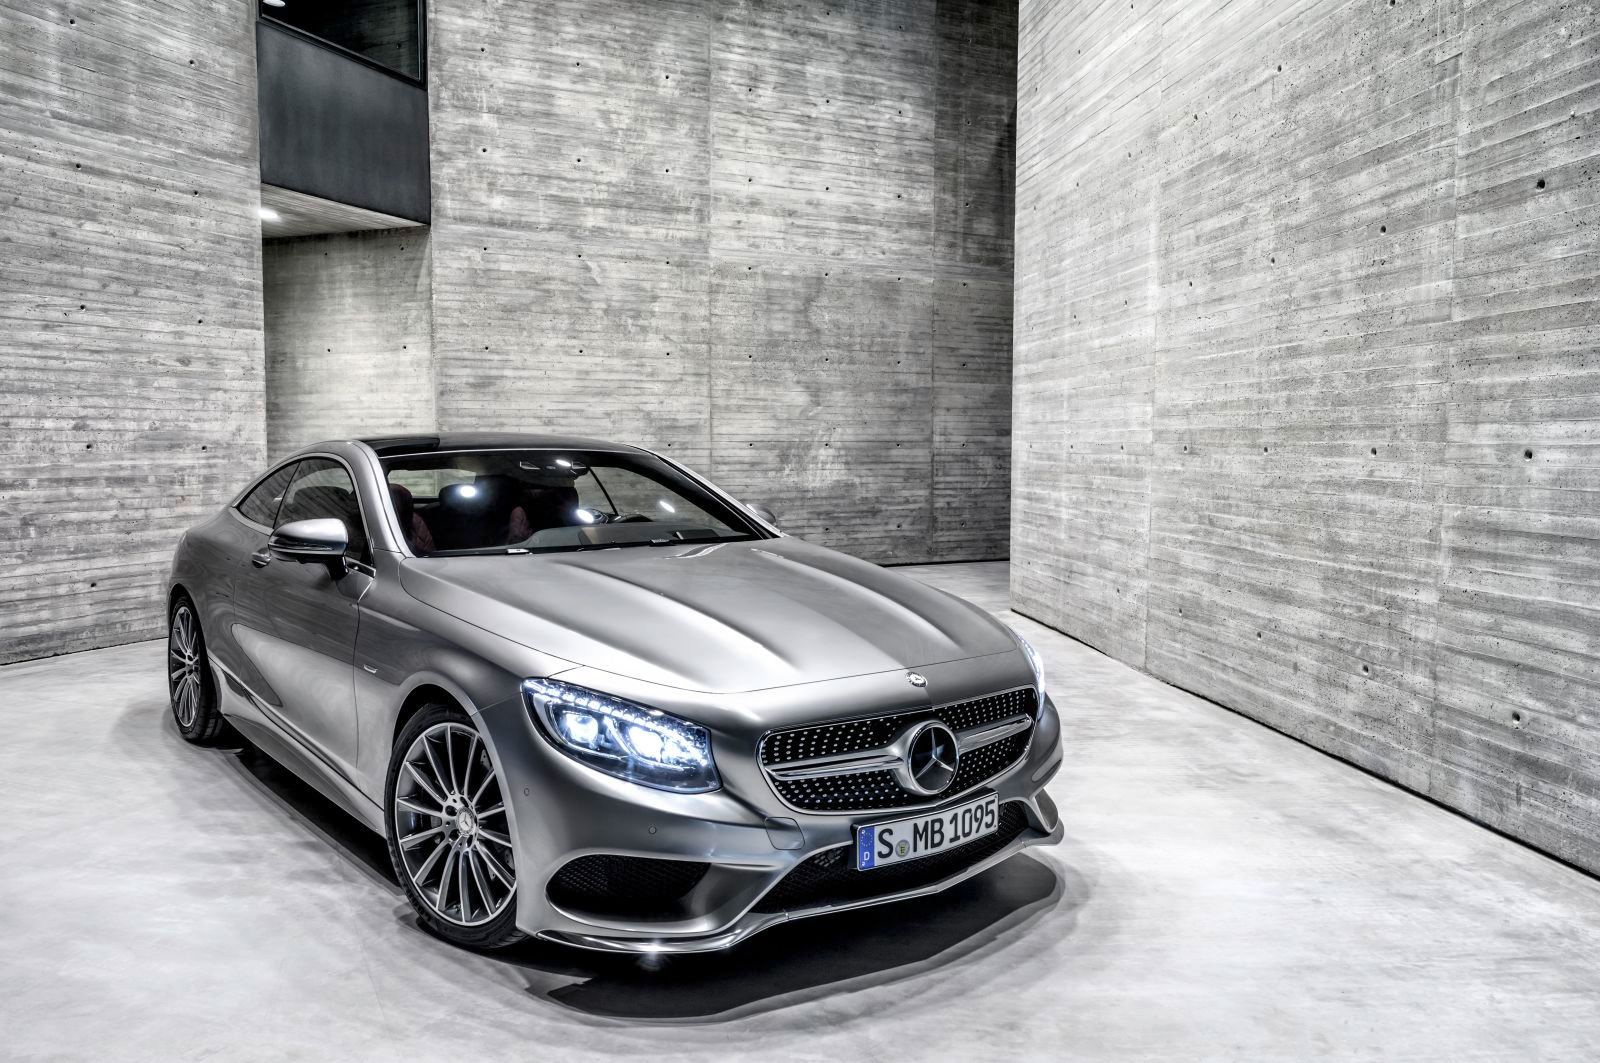 2015 Mercedes S-Class Coupe